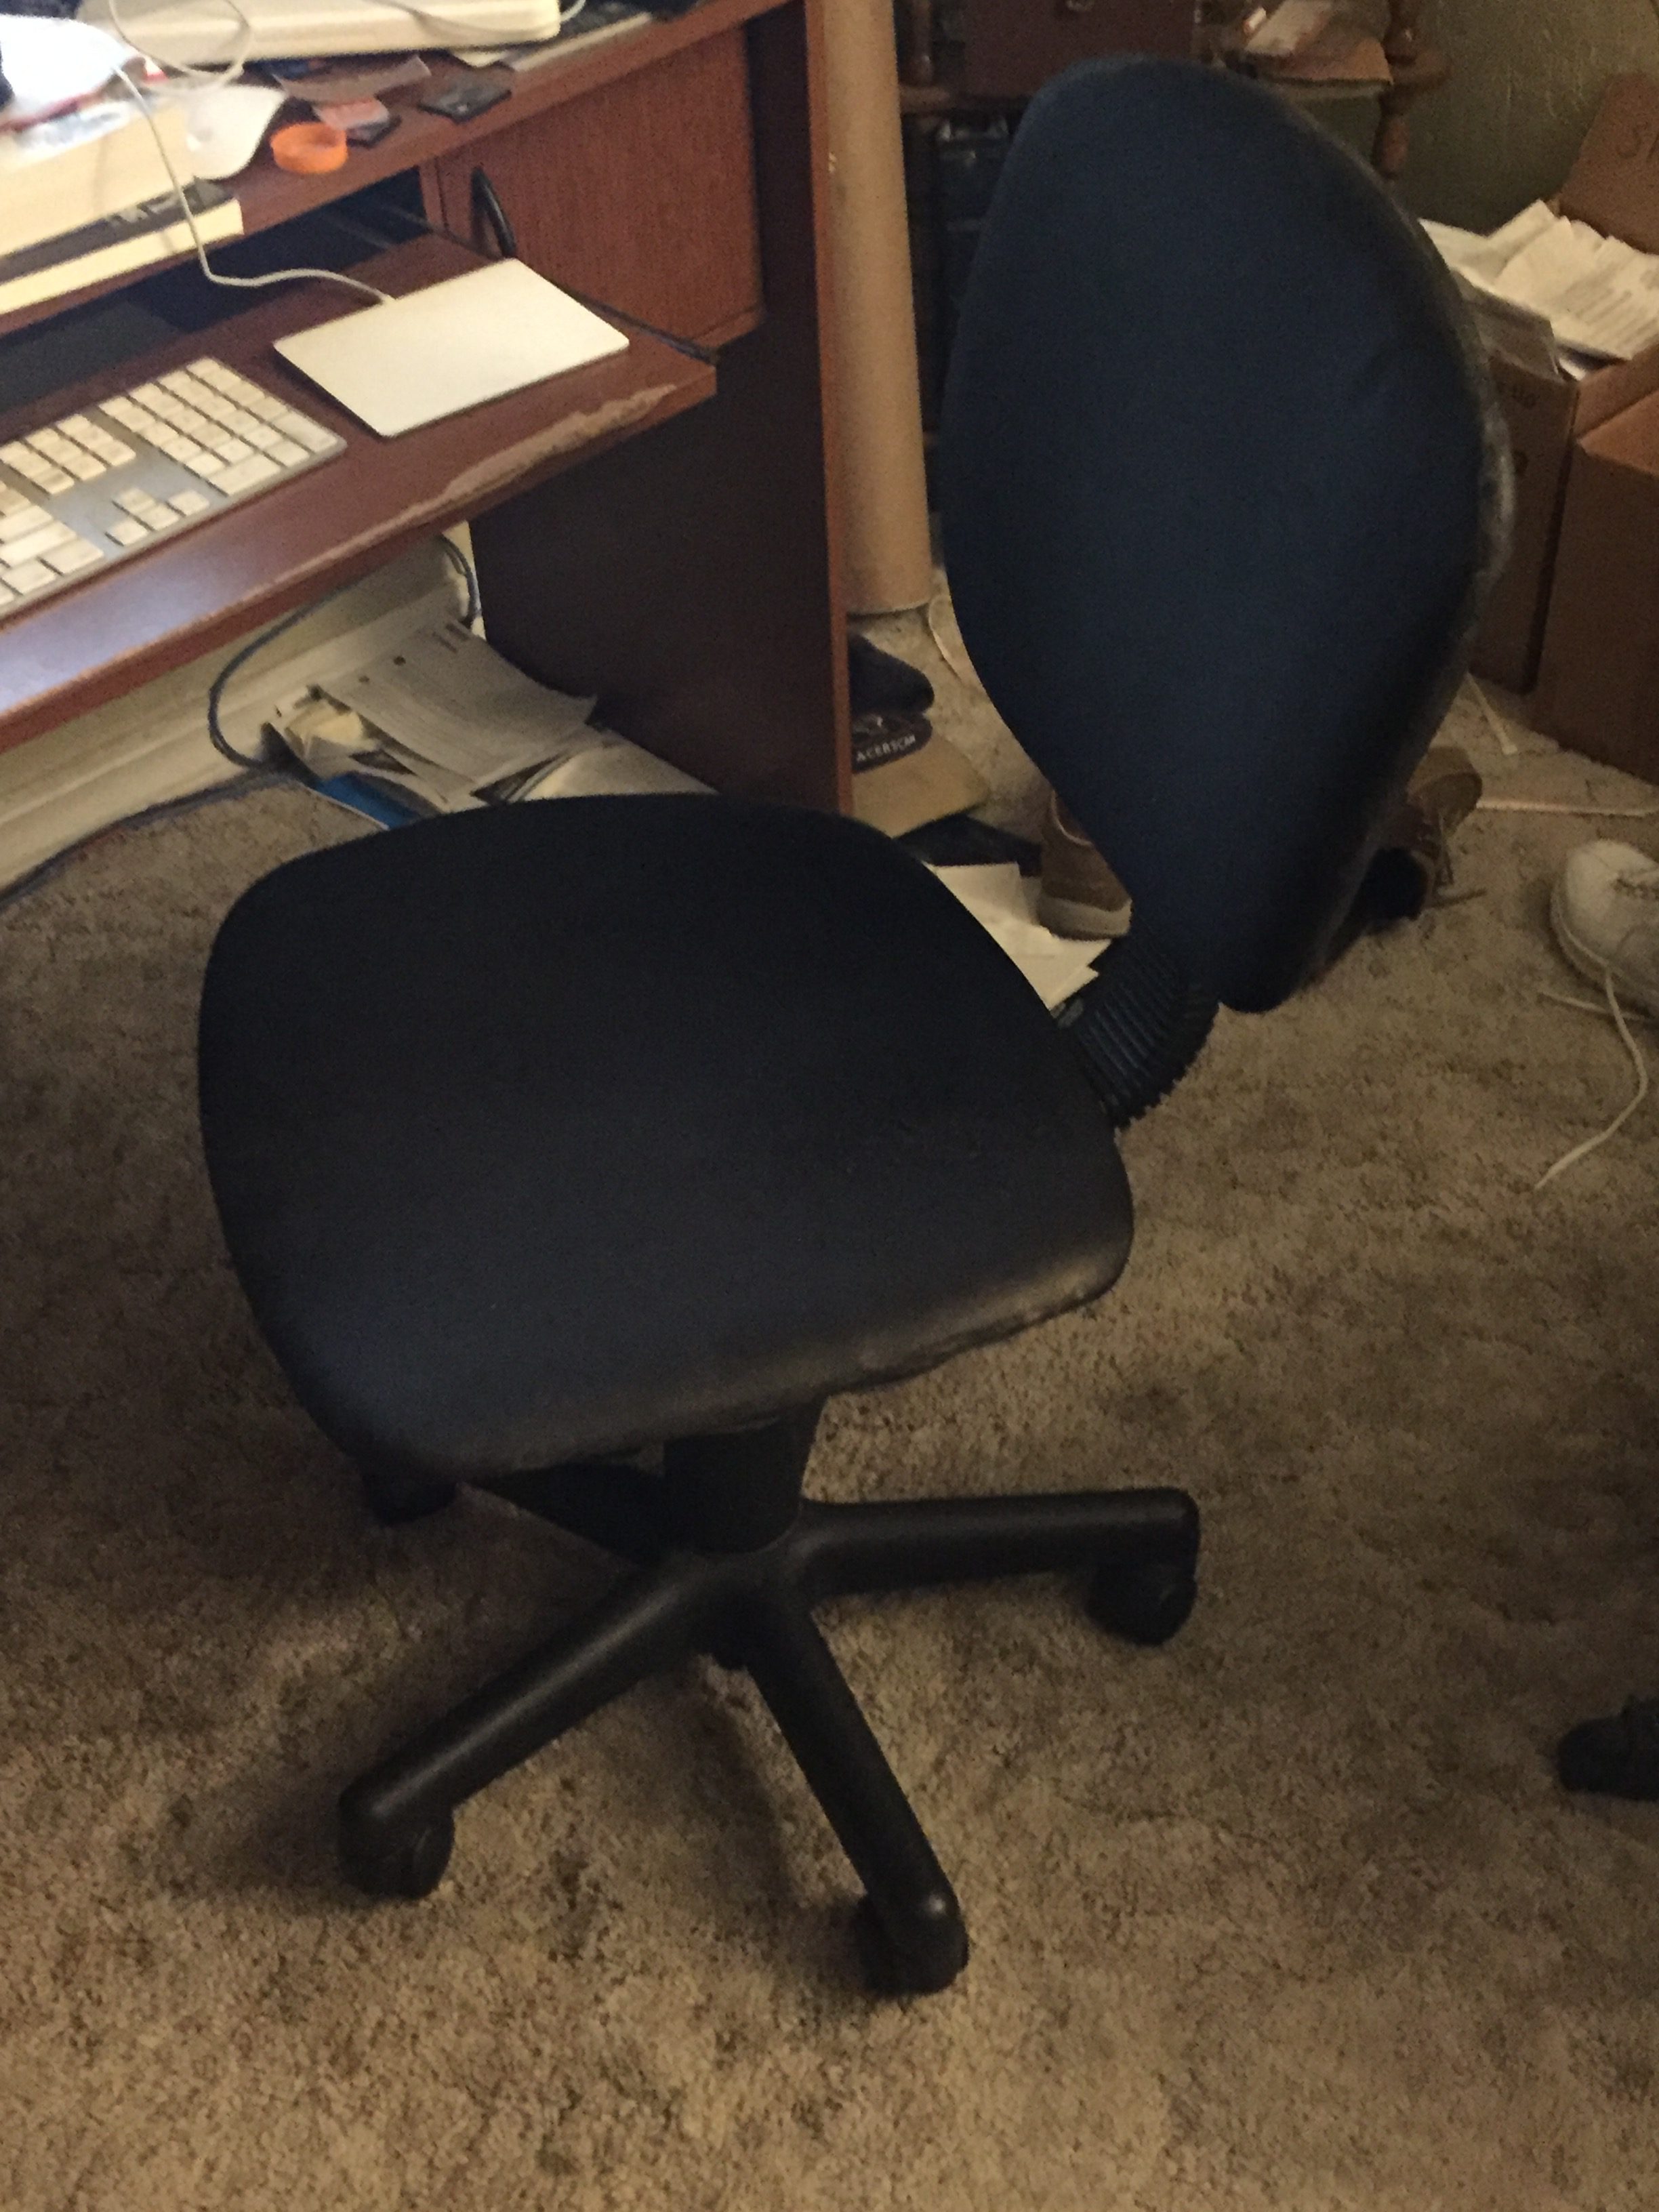 Requiem For My Crappy Little Office Chair Muddled Ramblings And